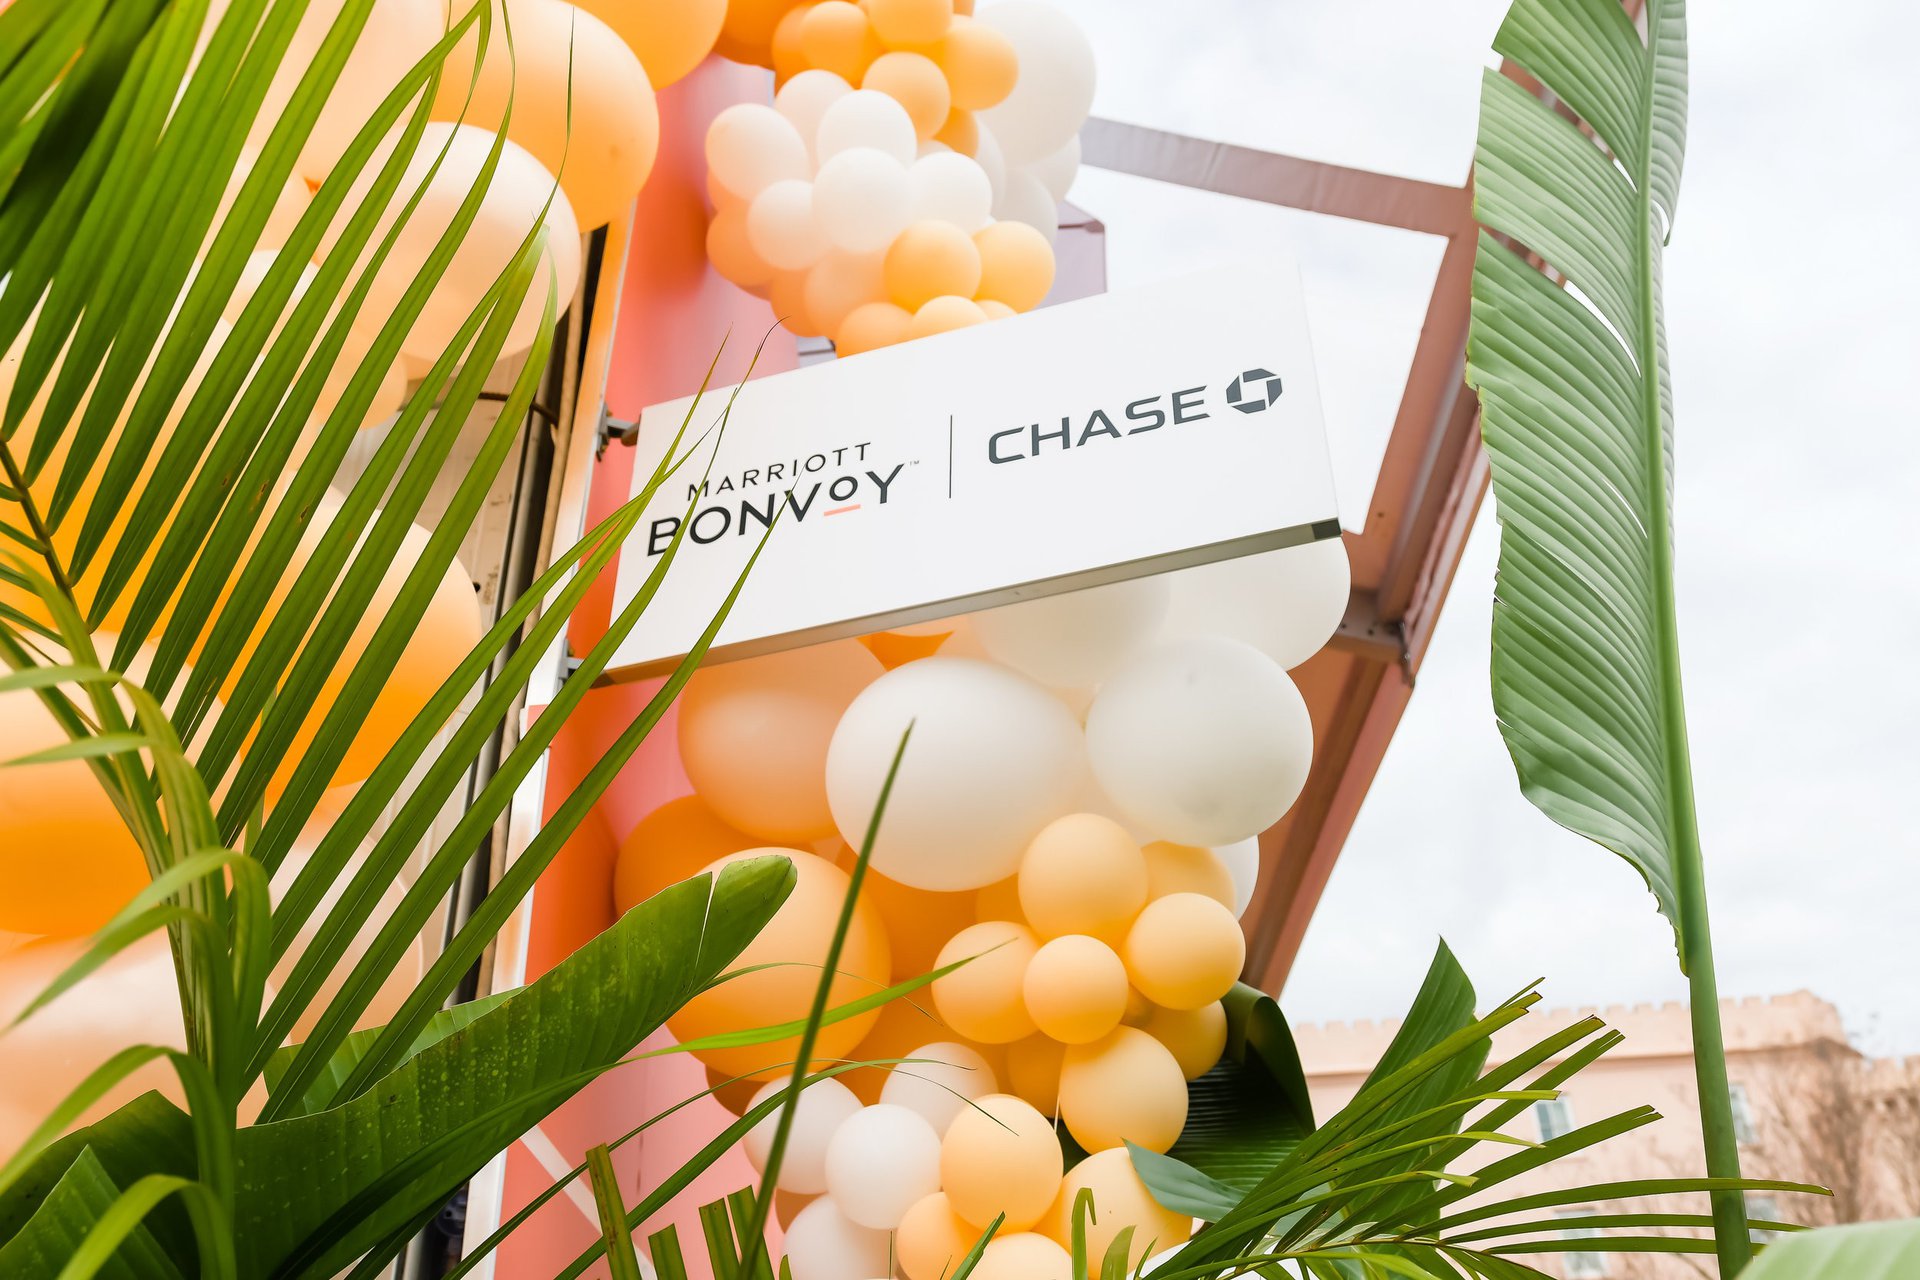 Crush Studio is known for their playful use of color. They partnered with Marriott Bonvoy  Boundless™ from Chase to put on an interactive event at the Charleston Wine & Food Festival.